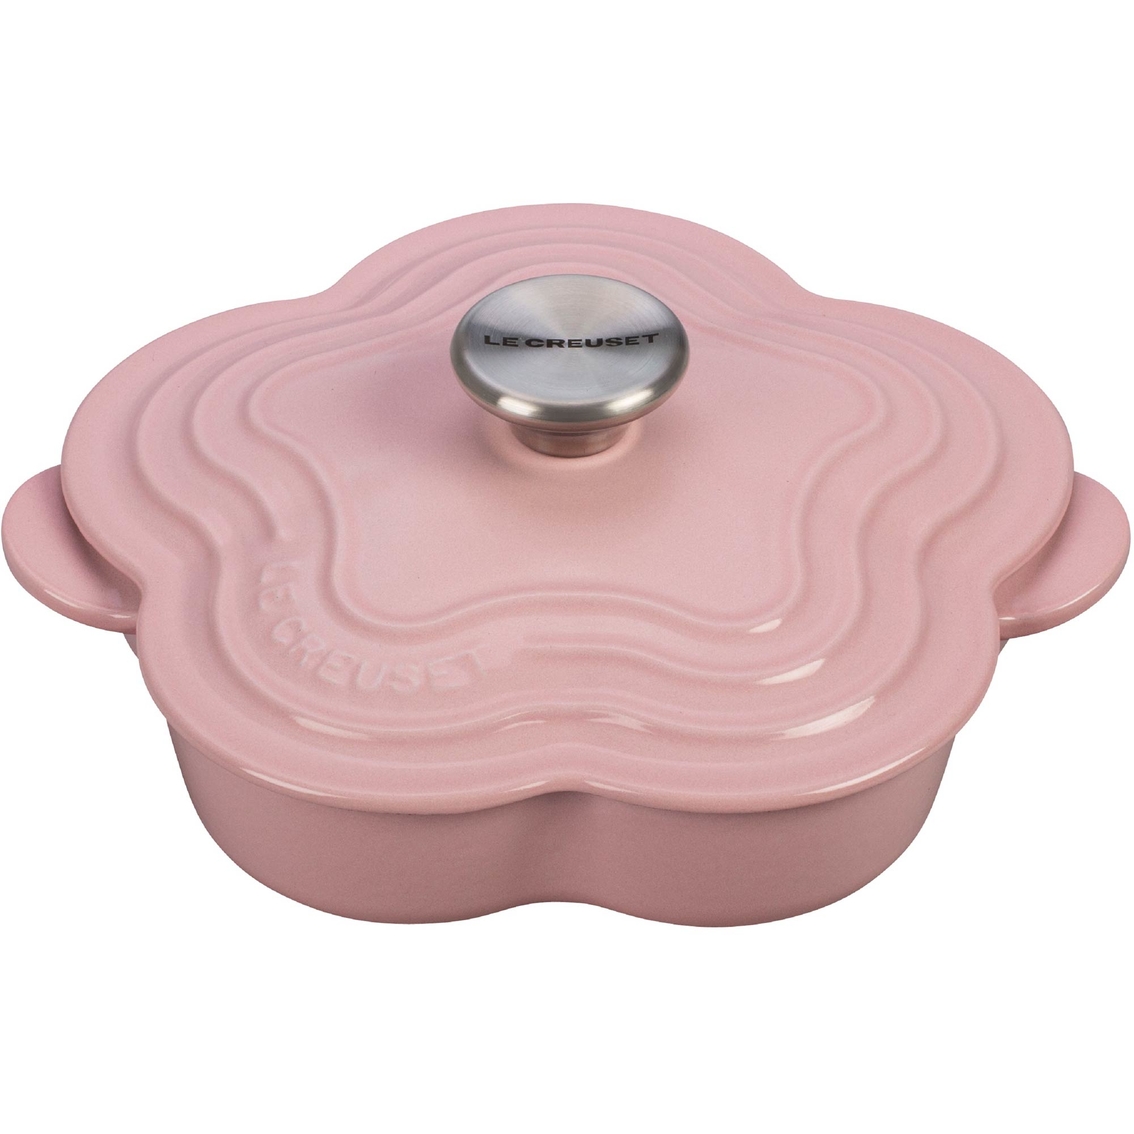 Le Creuset's Flower-Shaped Cookware Is on Sale